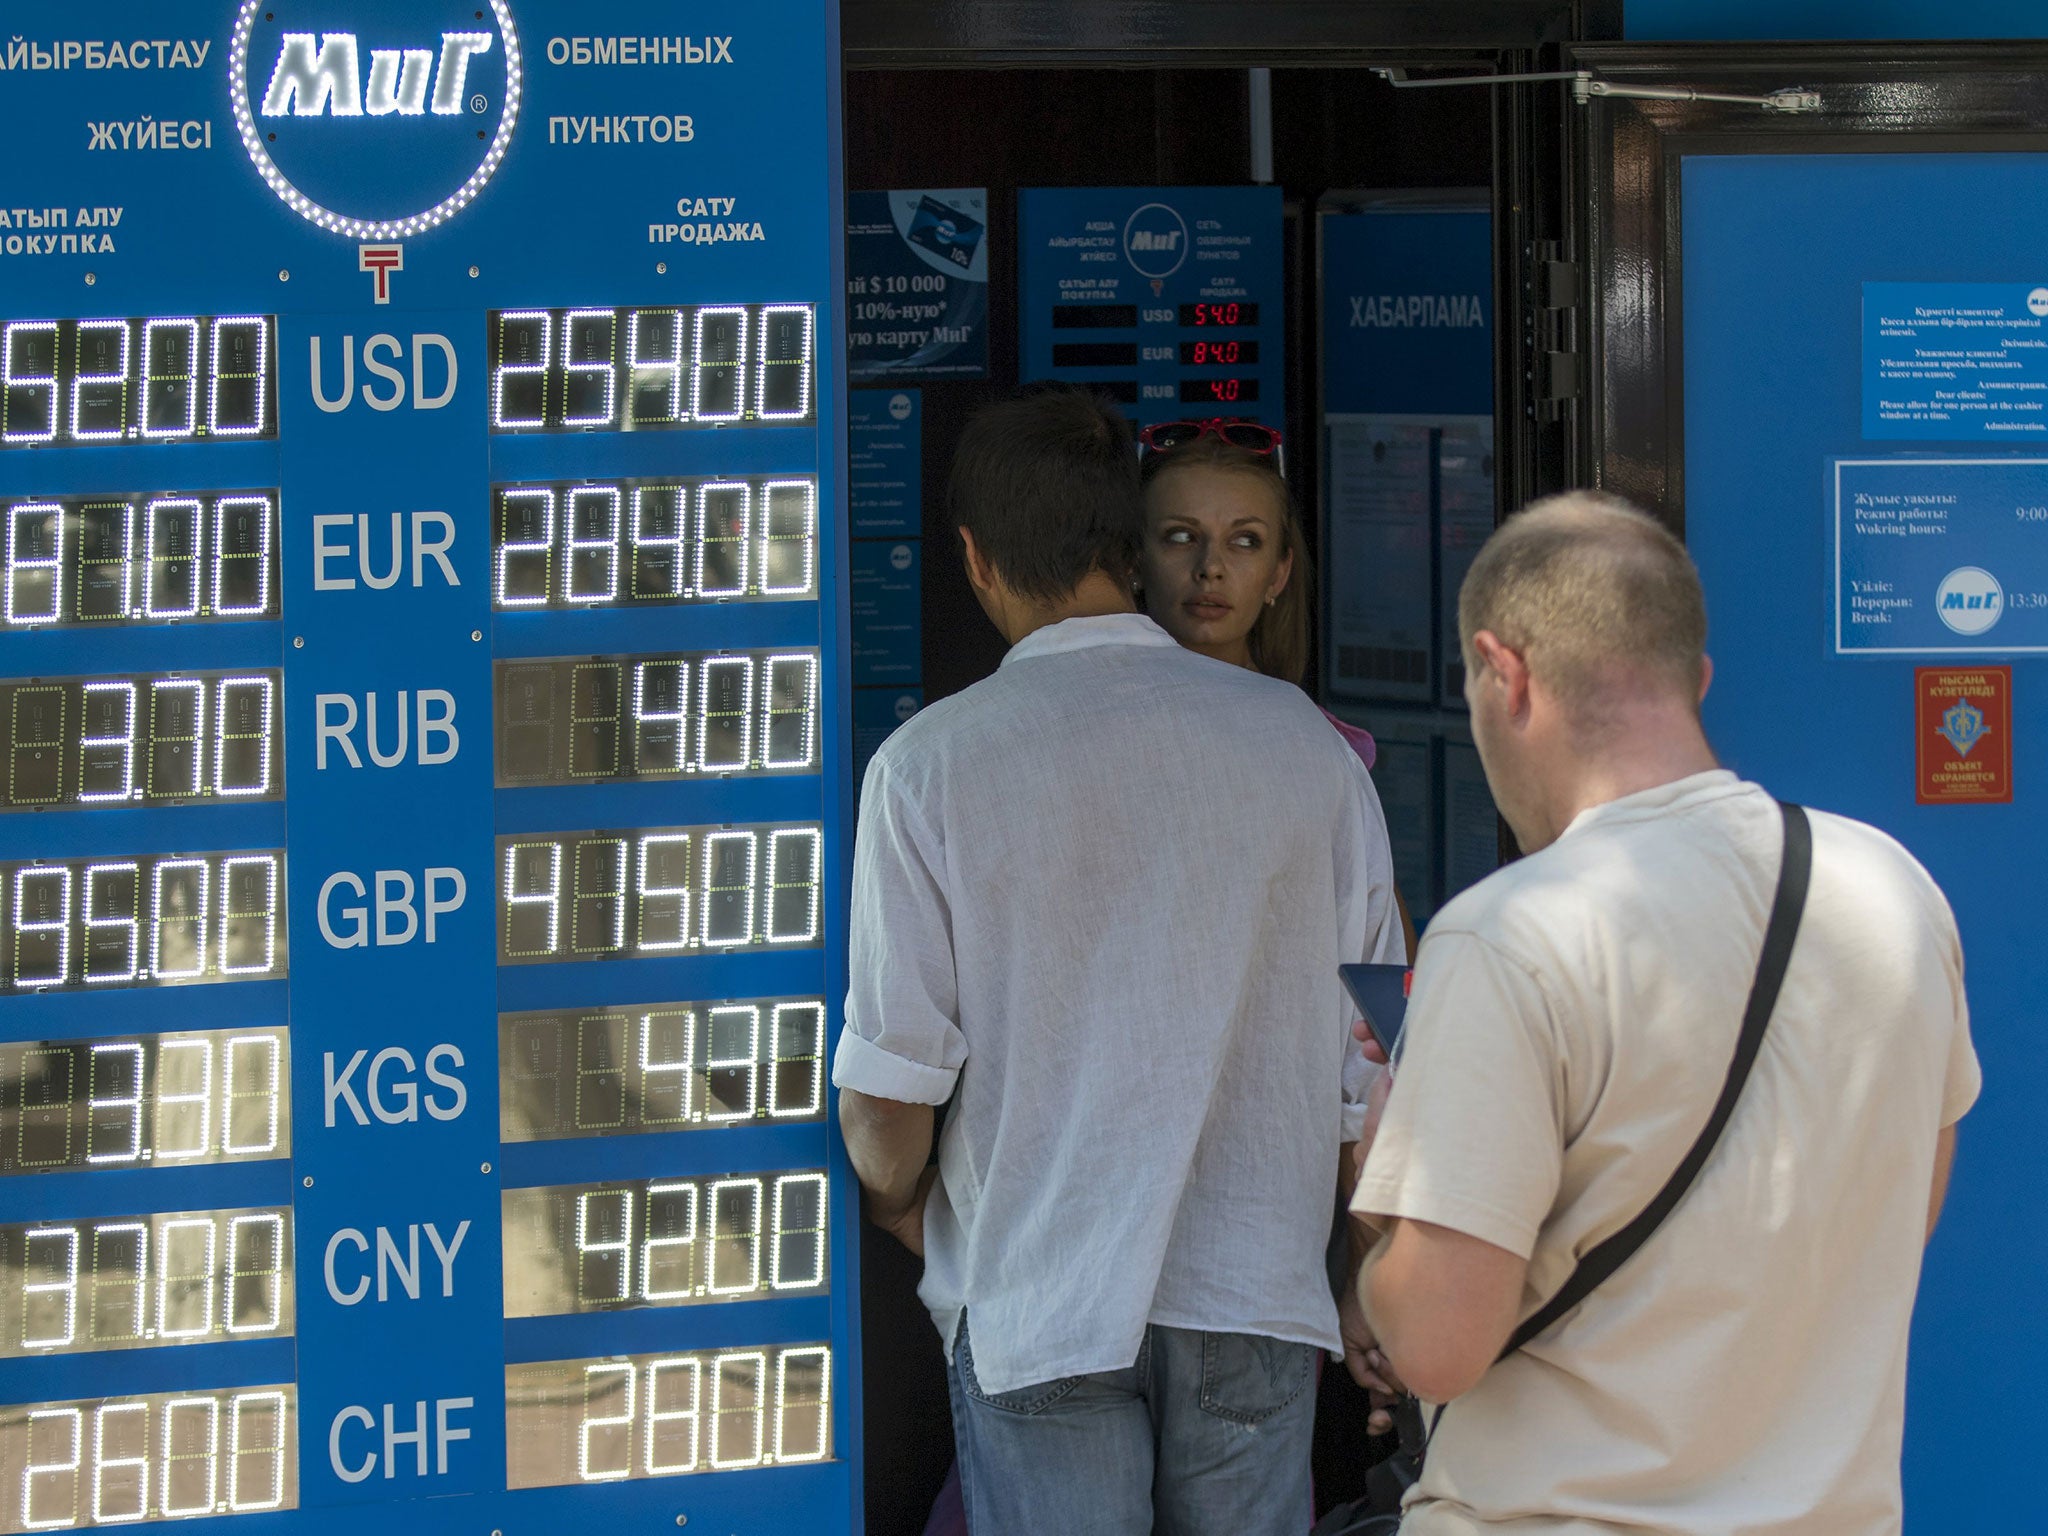 Kazakhstan’s tenge lost 24 per cent of its value against the dollar yesterday